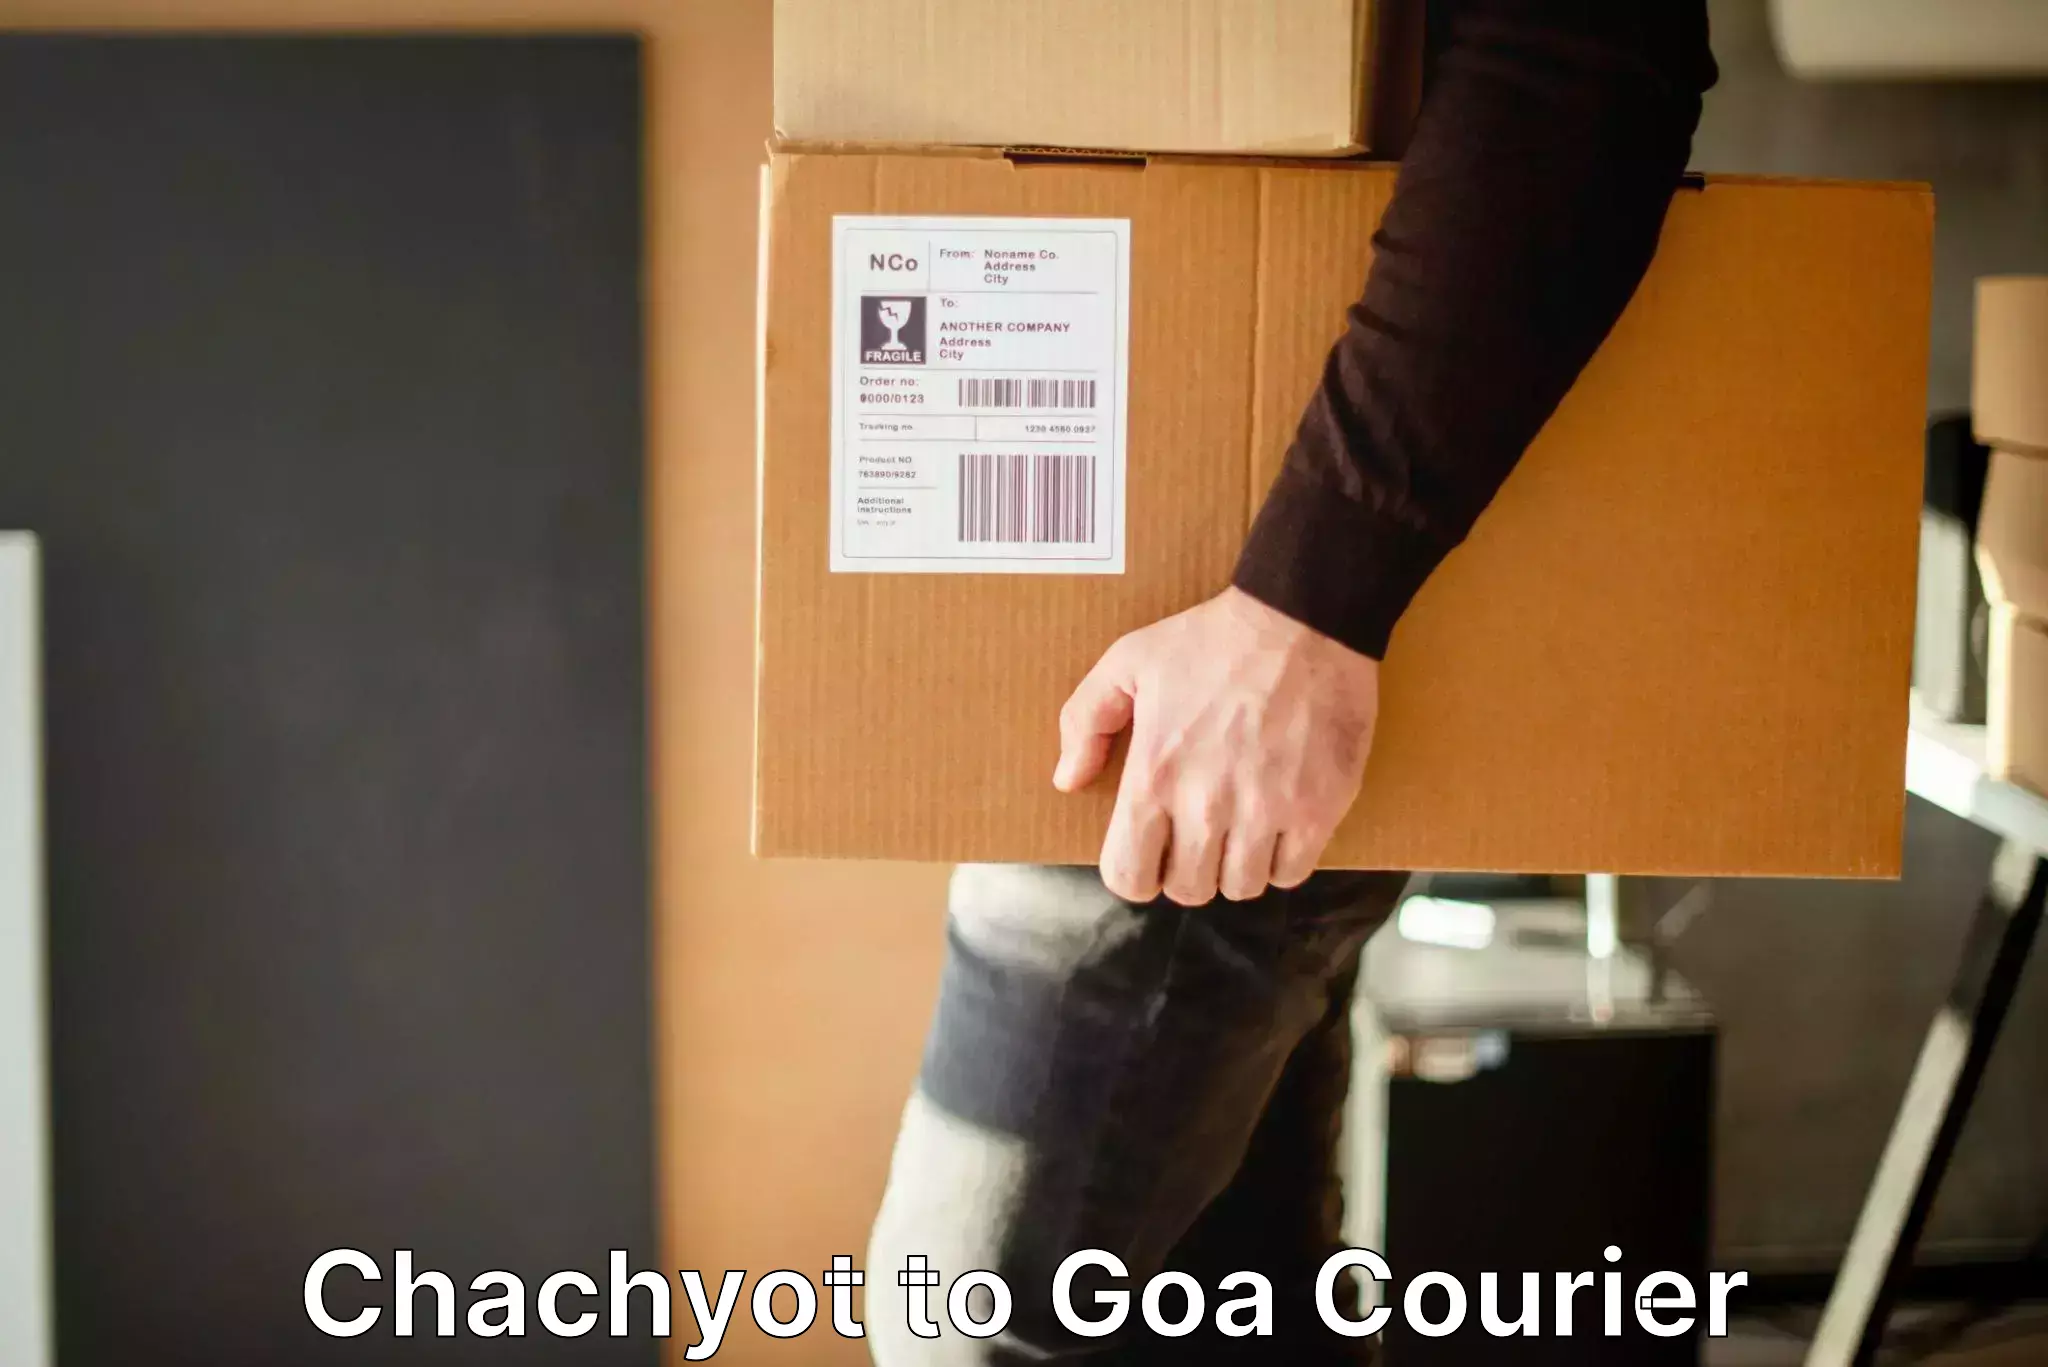 Same day luggage service Chachyot to Goa